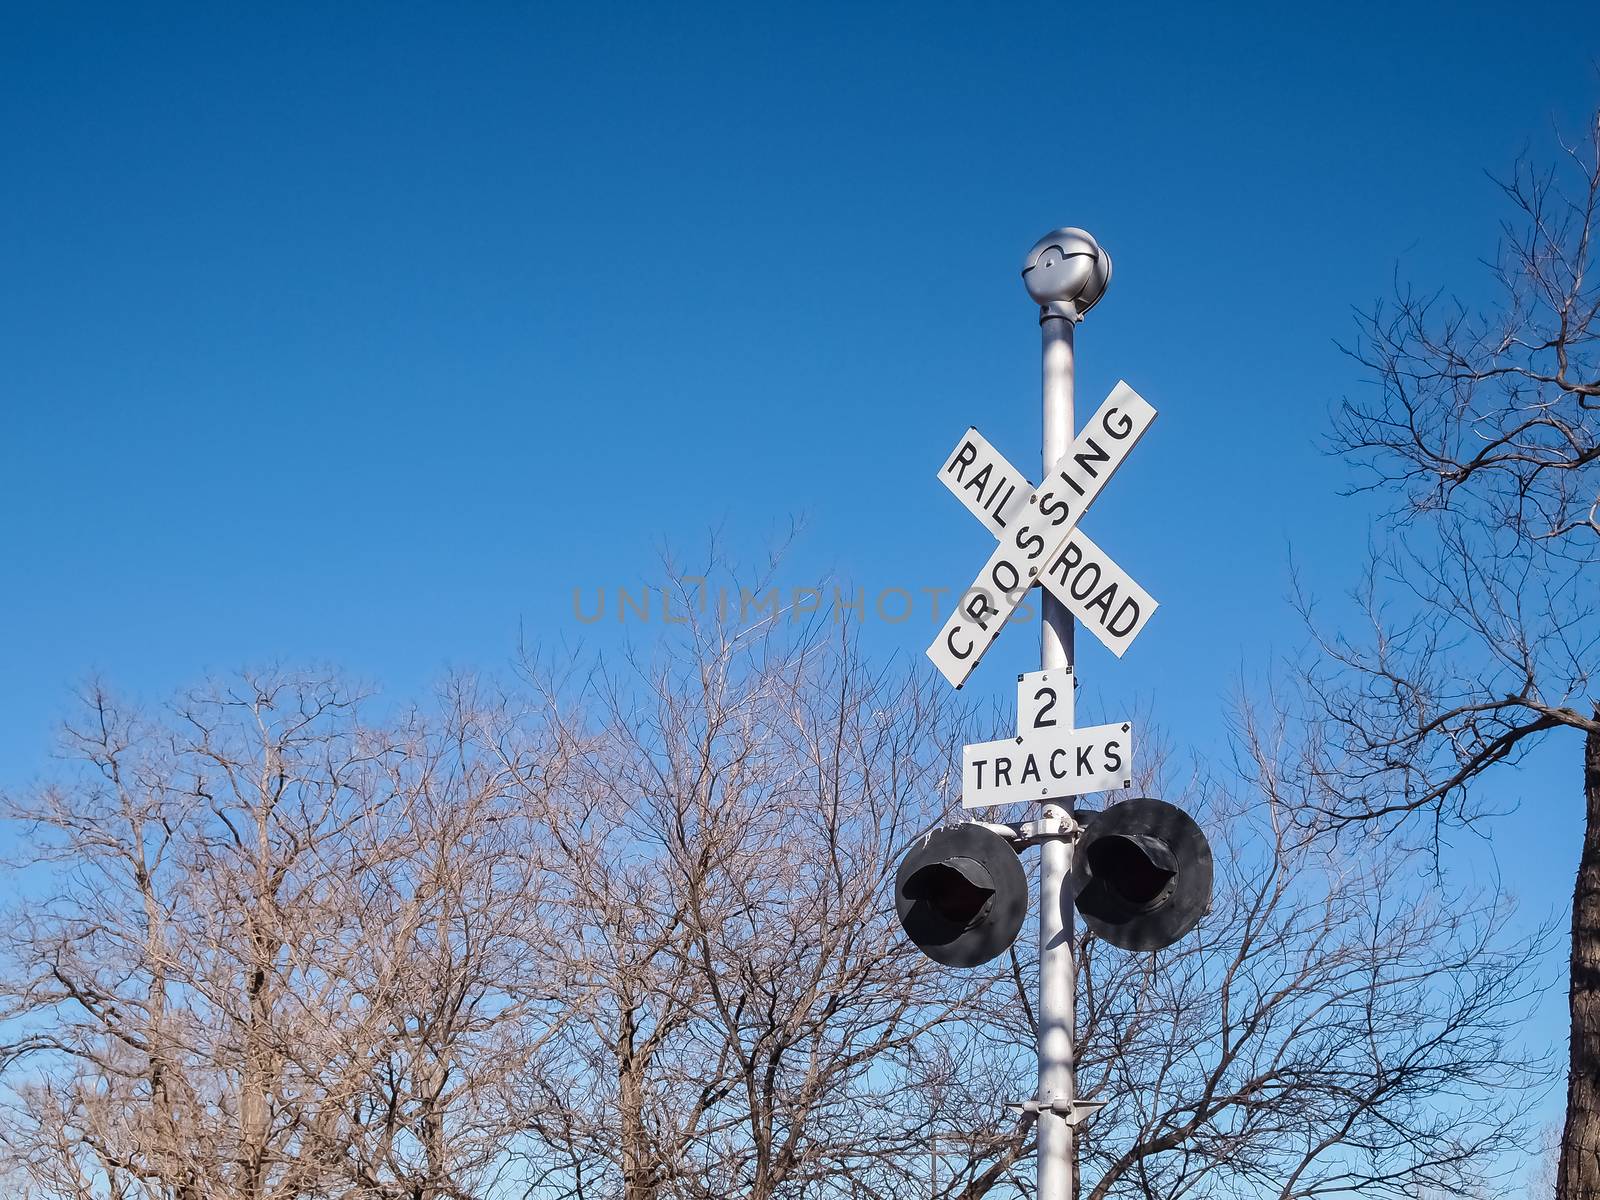 Railroad crossing sign against blue sky and tree background, with space for your text.